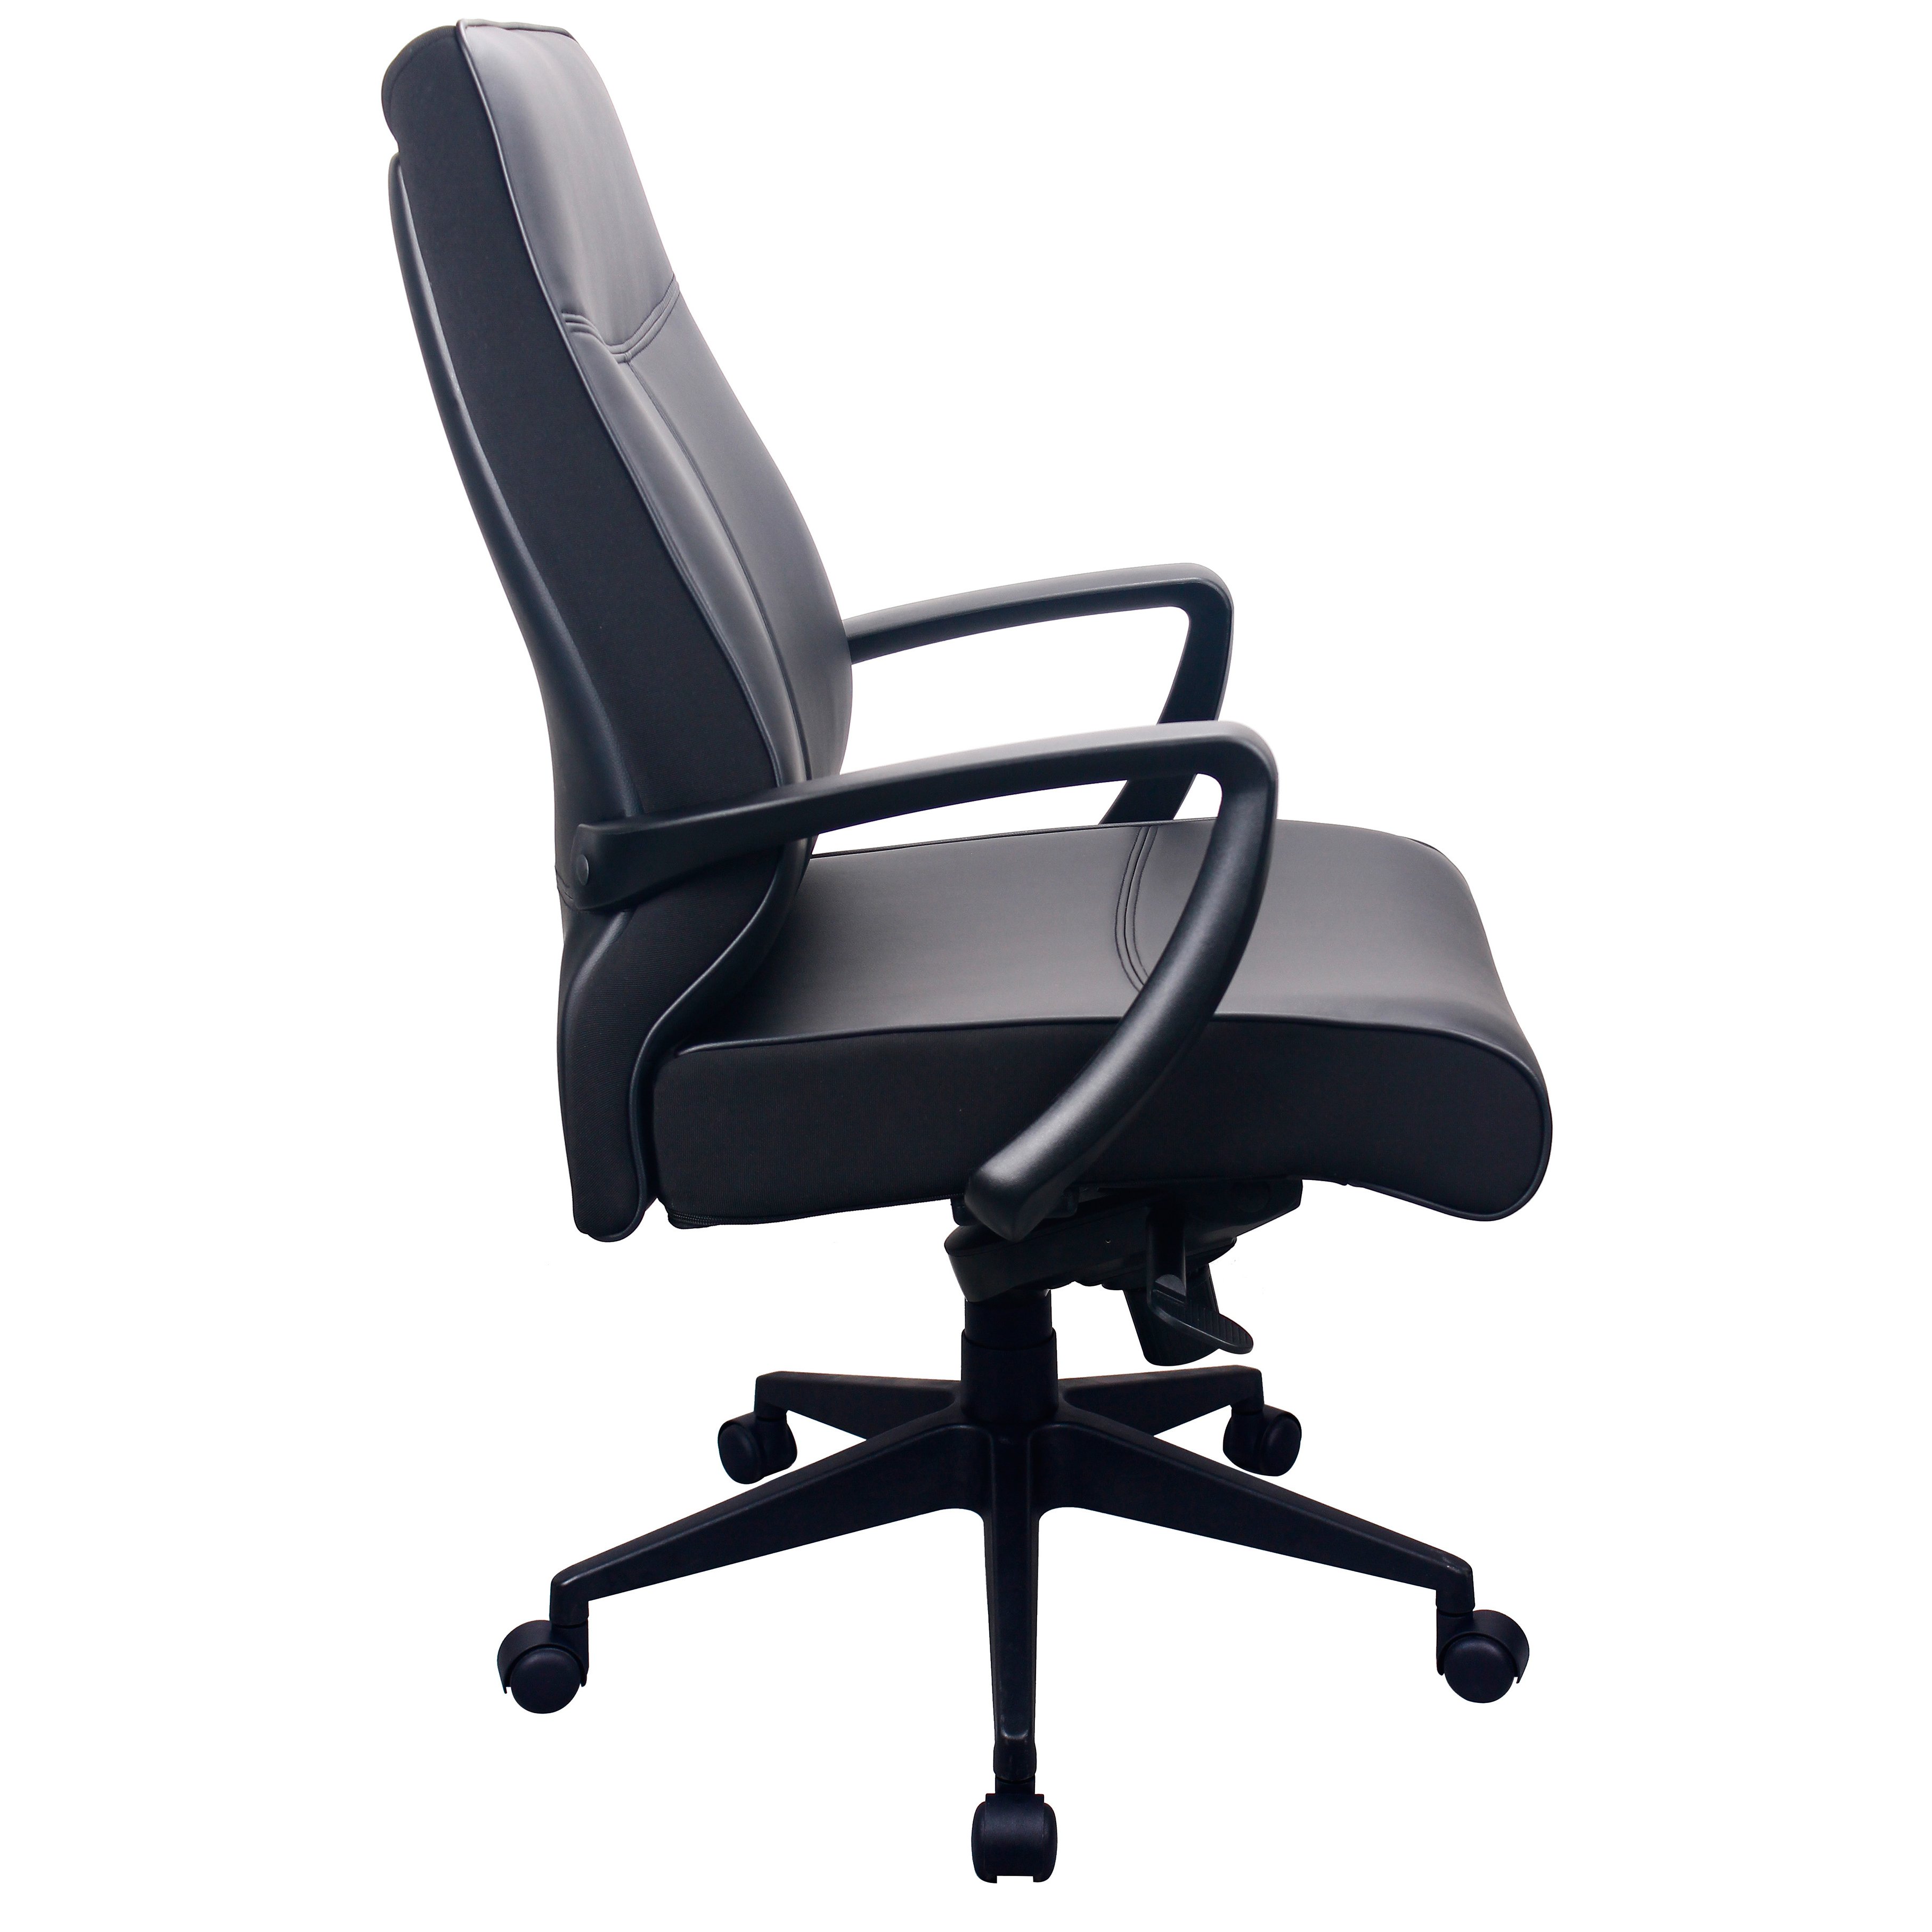 tempur pedic office chair tempur pedic high back leather executive office chair with arms tp